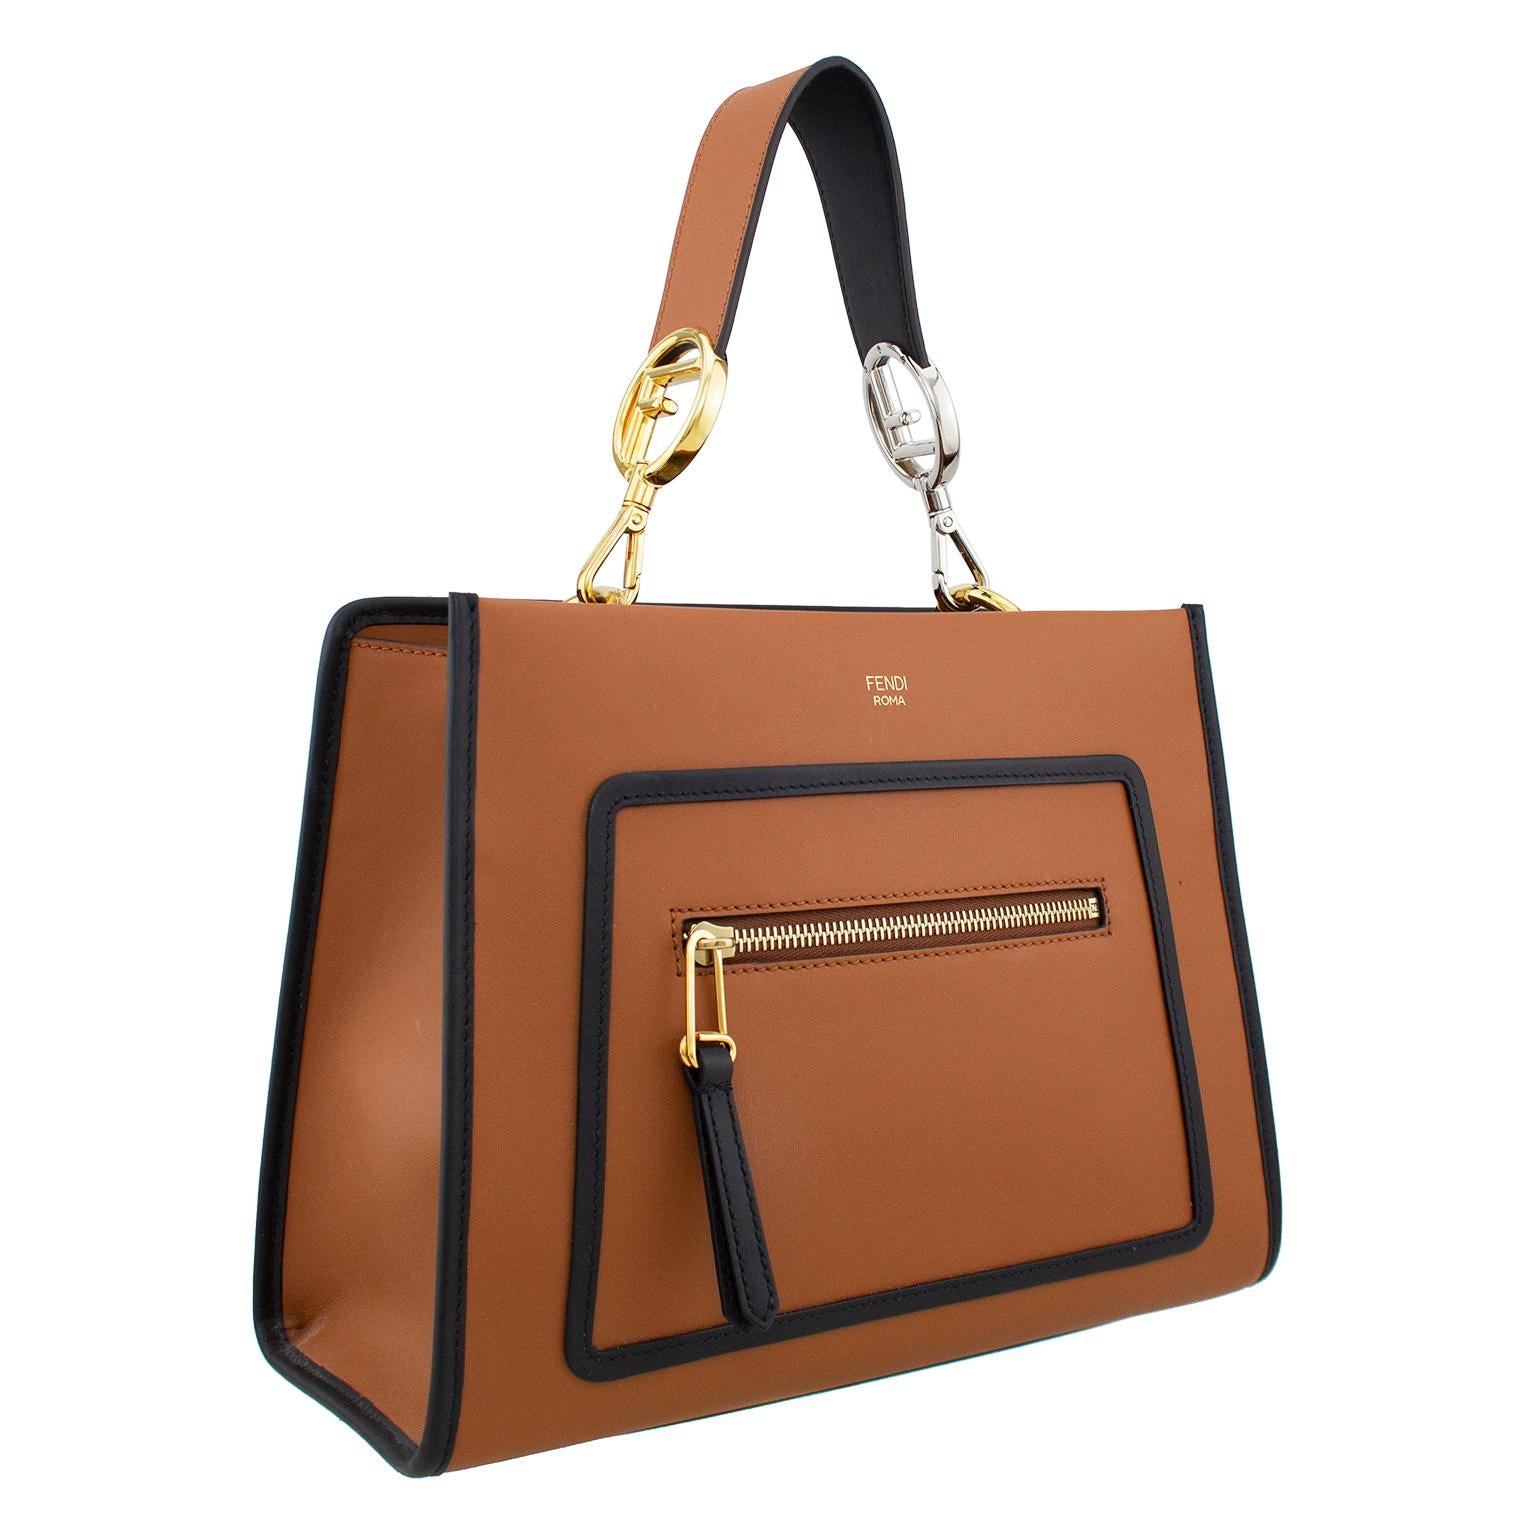 Brown leather Fendi Runaway bag with black leather trim. This bag was first seen on the Fall Winter 2017 runway and has a very straightforward and modern look with the trapezoid shape. The short & removable black leather top handle strap features